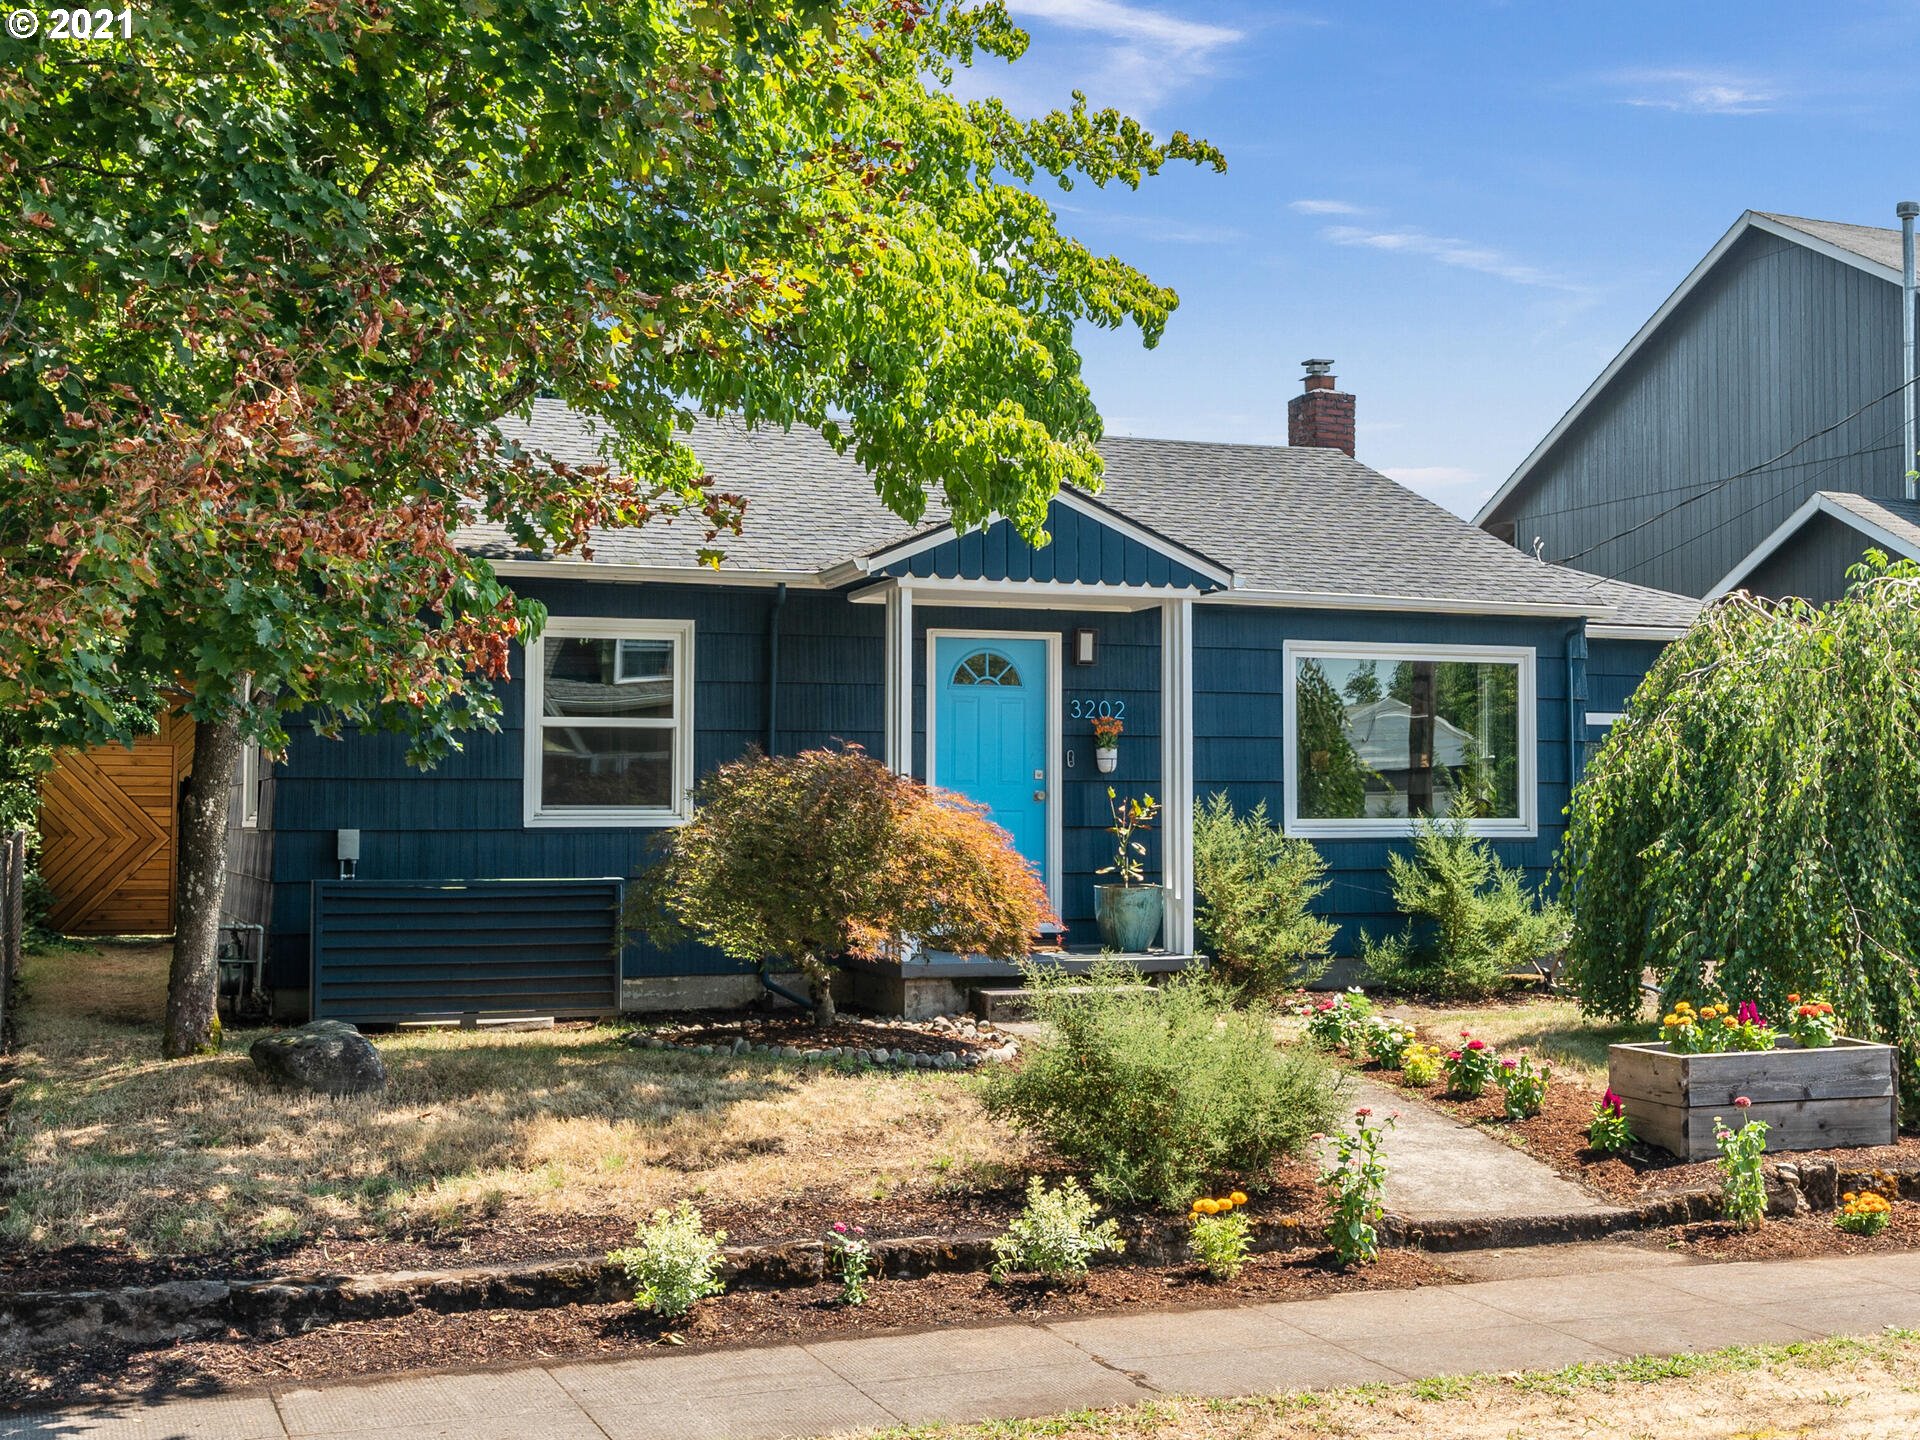 3202 SE 56TH AVE (1 of 32)